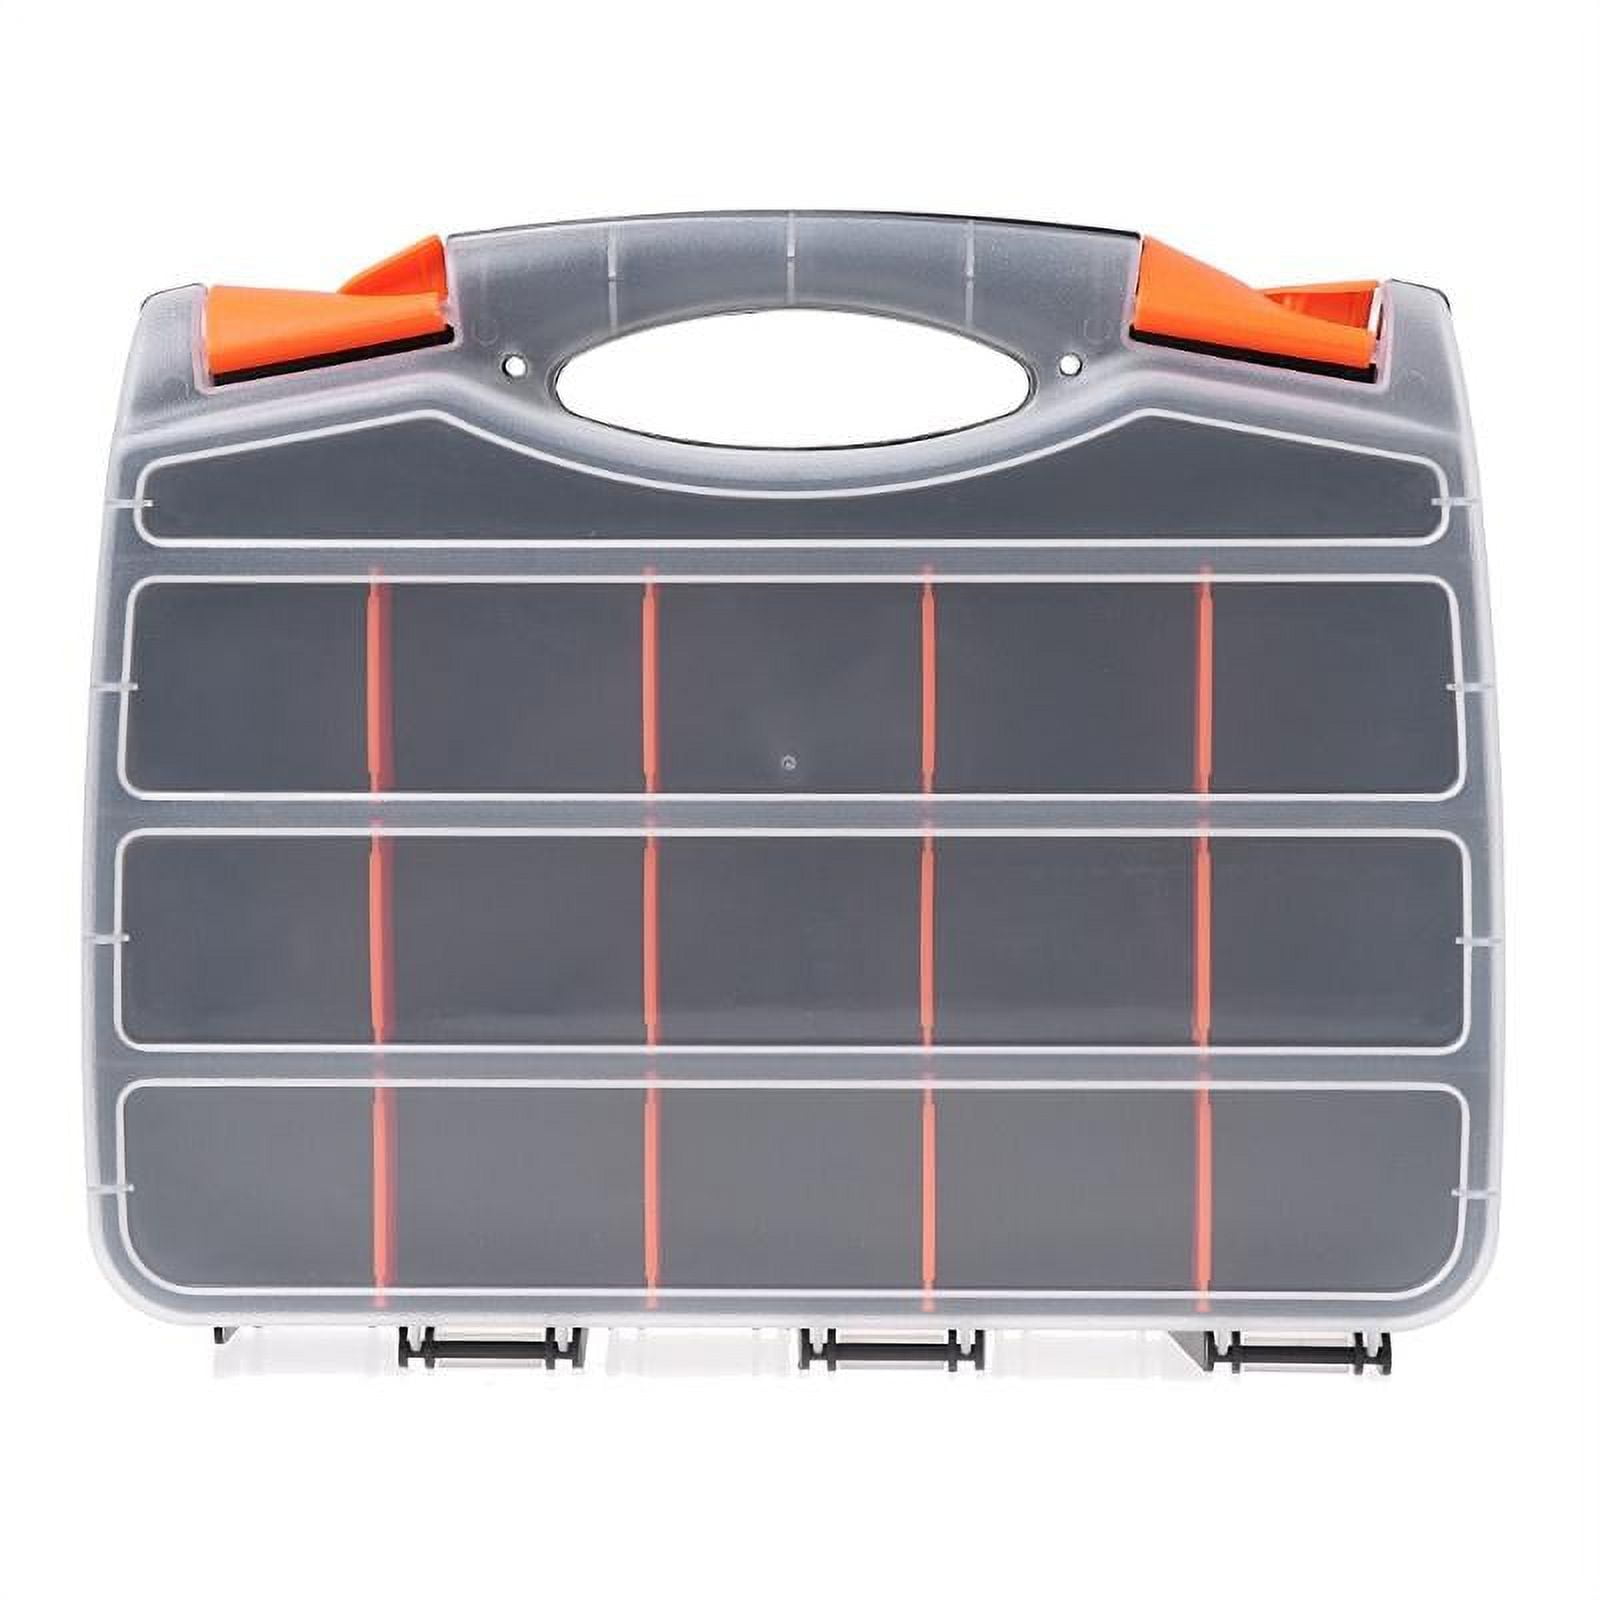 Stackable Plastic Small Parts Container Box Shelf Screw Storage Bin  Organizer for Storing Parts, Small Tools, Fishing Tackle, Toys, Craft  Supplies - 1Pc Storage Box with 4 Pillars 